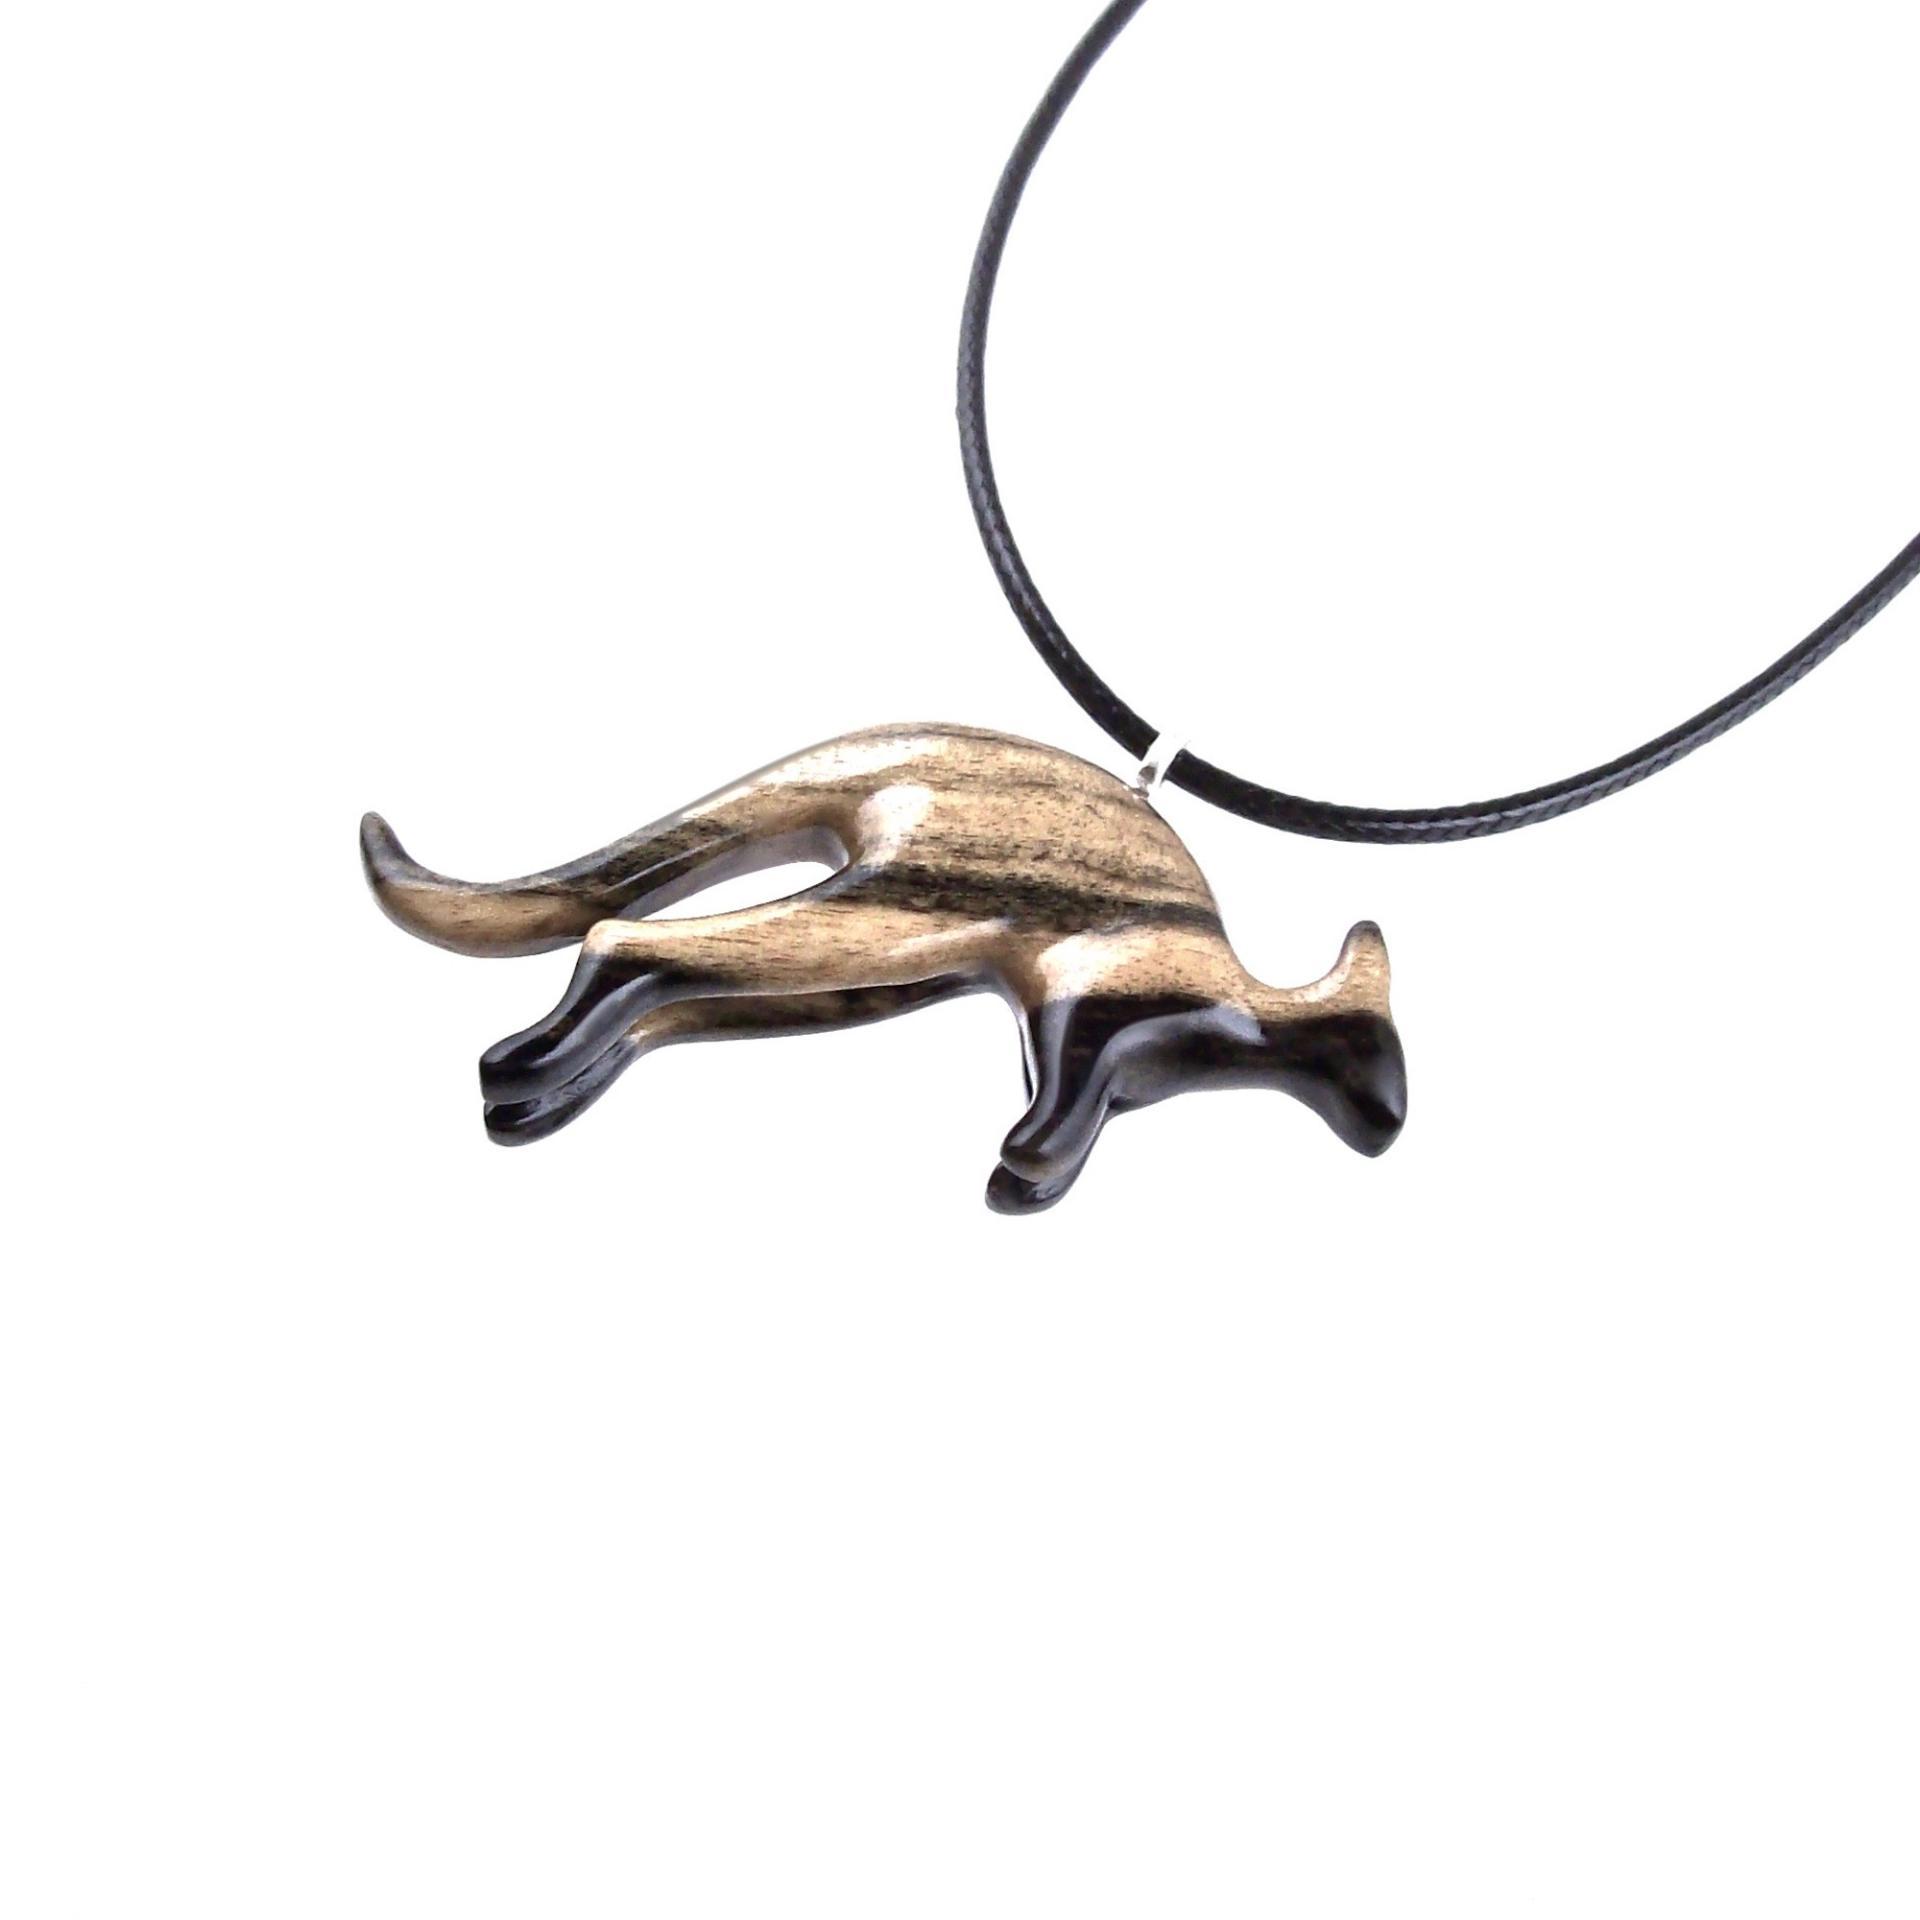 Hand Carved Kangaroo Pendant Necklace - Wooden Totem Spirit Animal Jewelry Gift for Men and Women